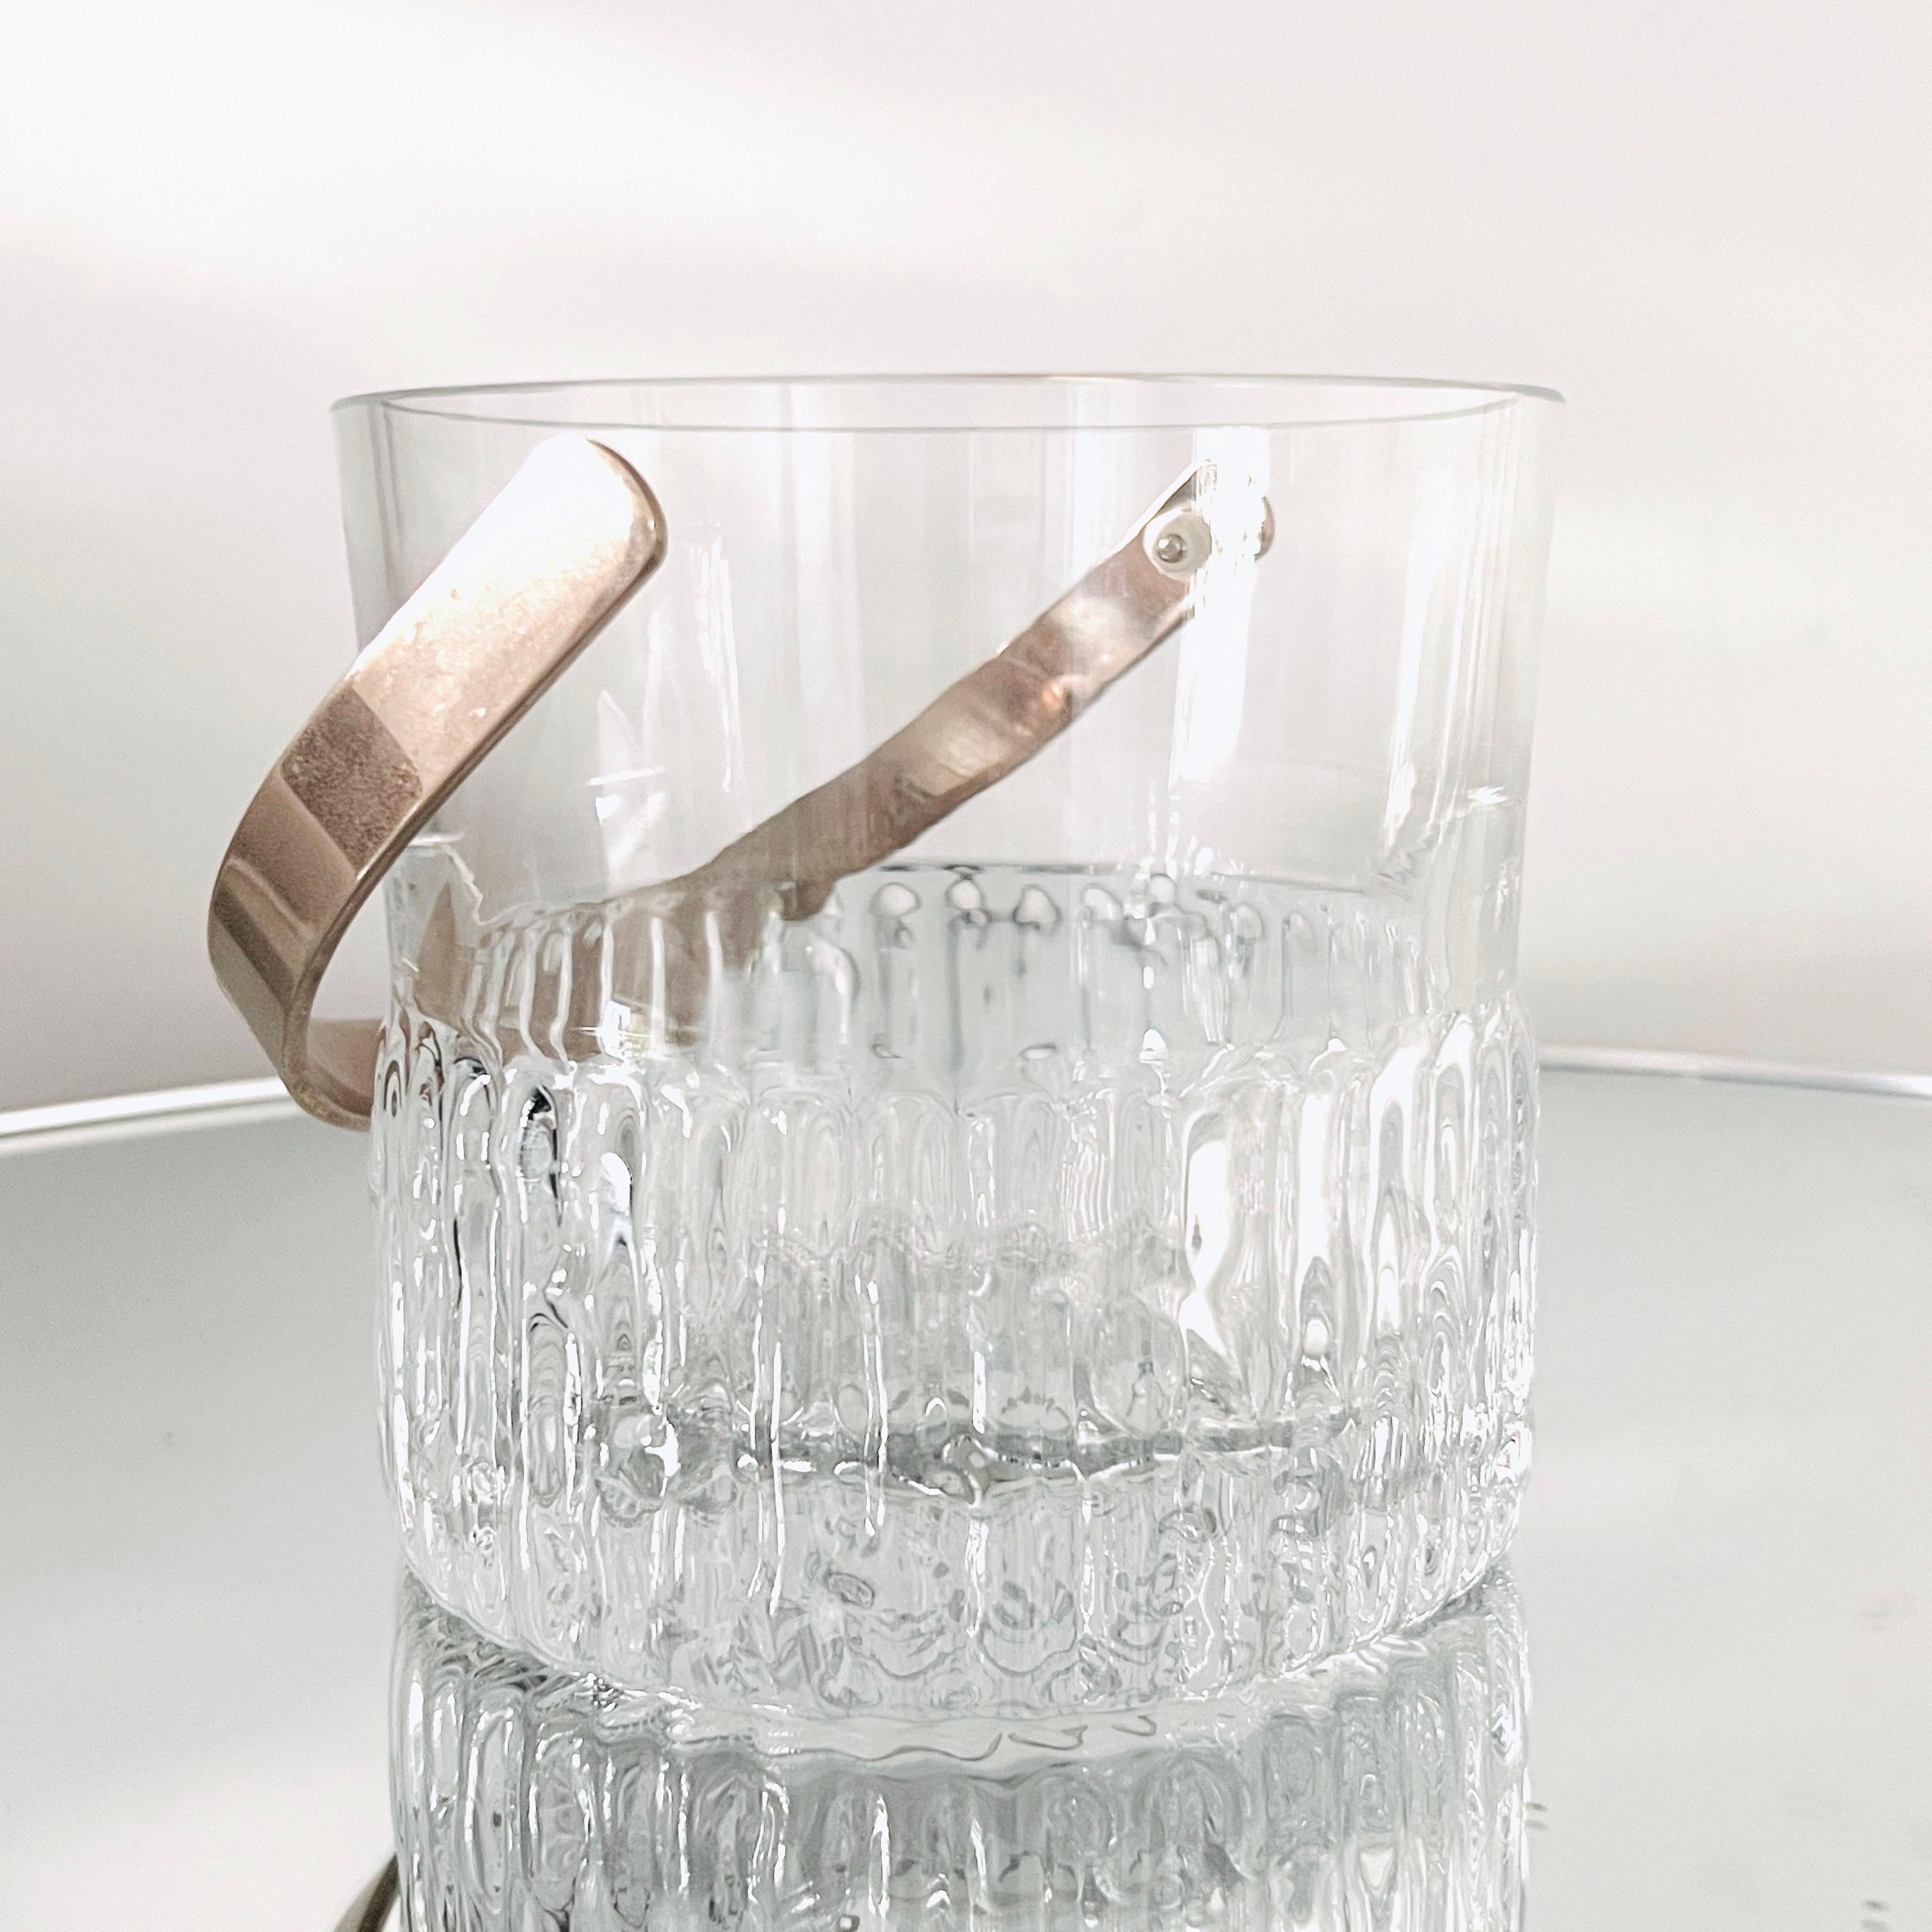 Mid-Century Modern Crystal Ice Bucket with Textured Glass, France, c. 1970s For Sale 2